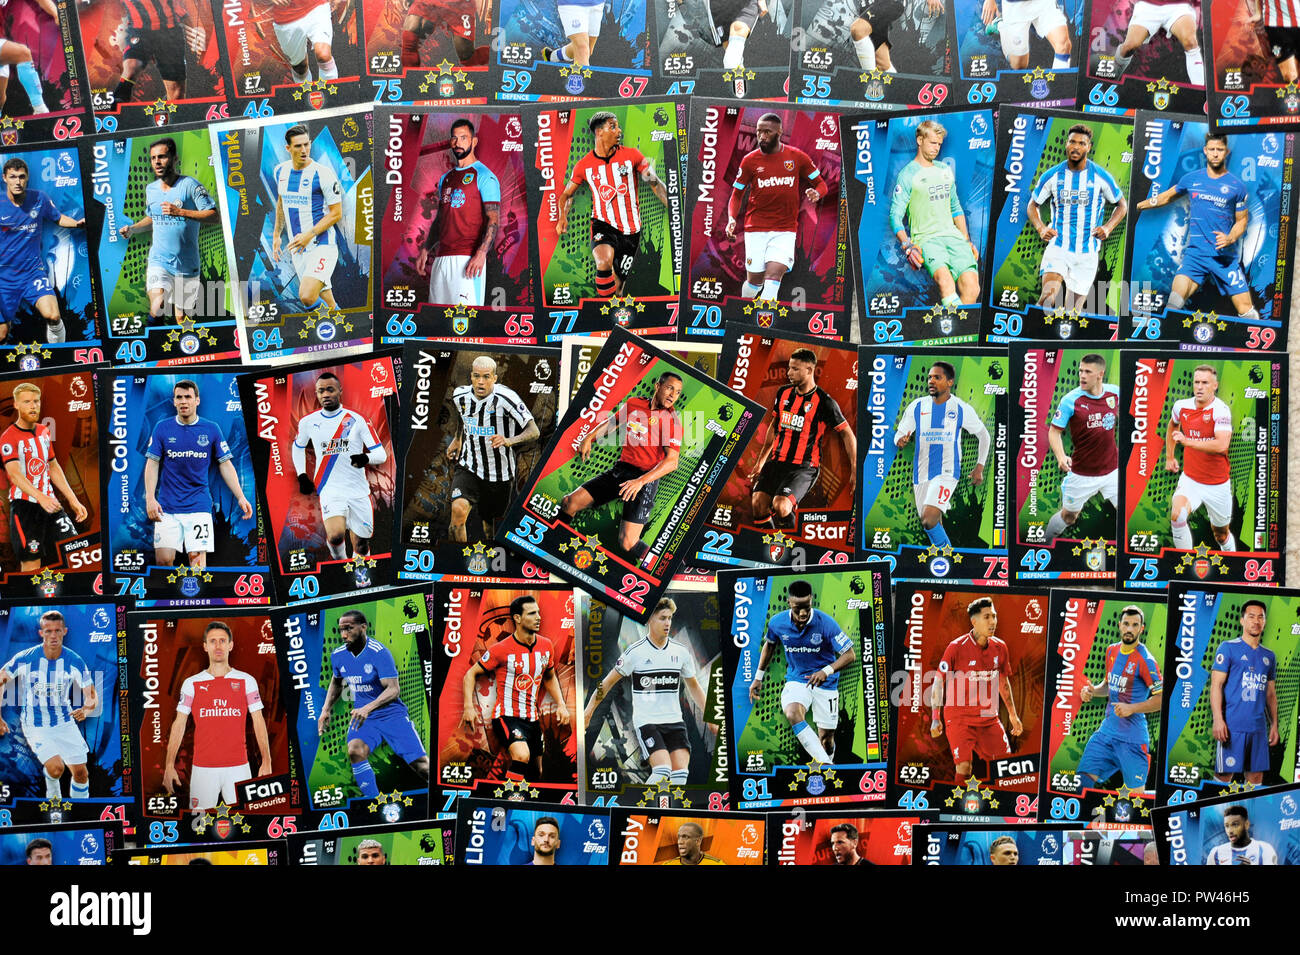 English Premier League Topps Match Attax trading cards Stock Photo